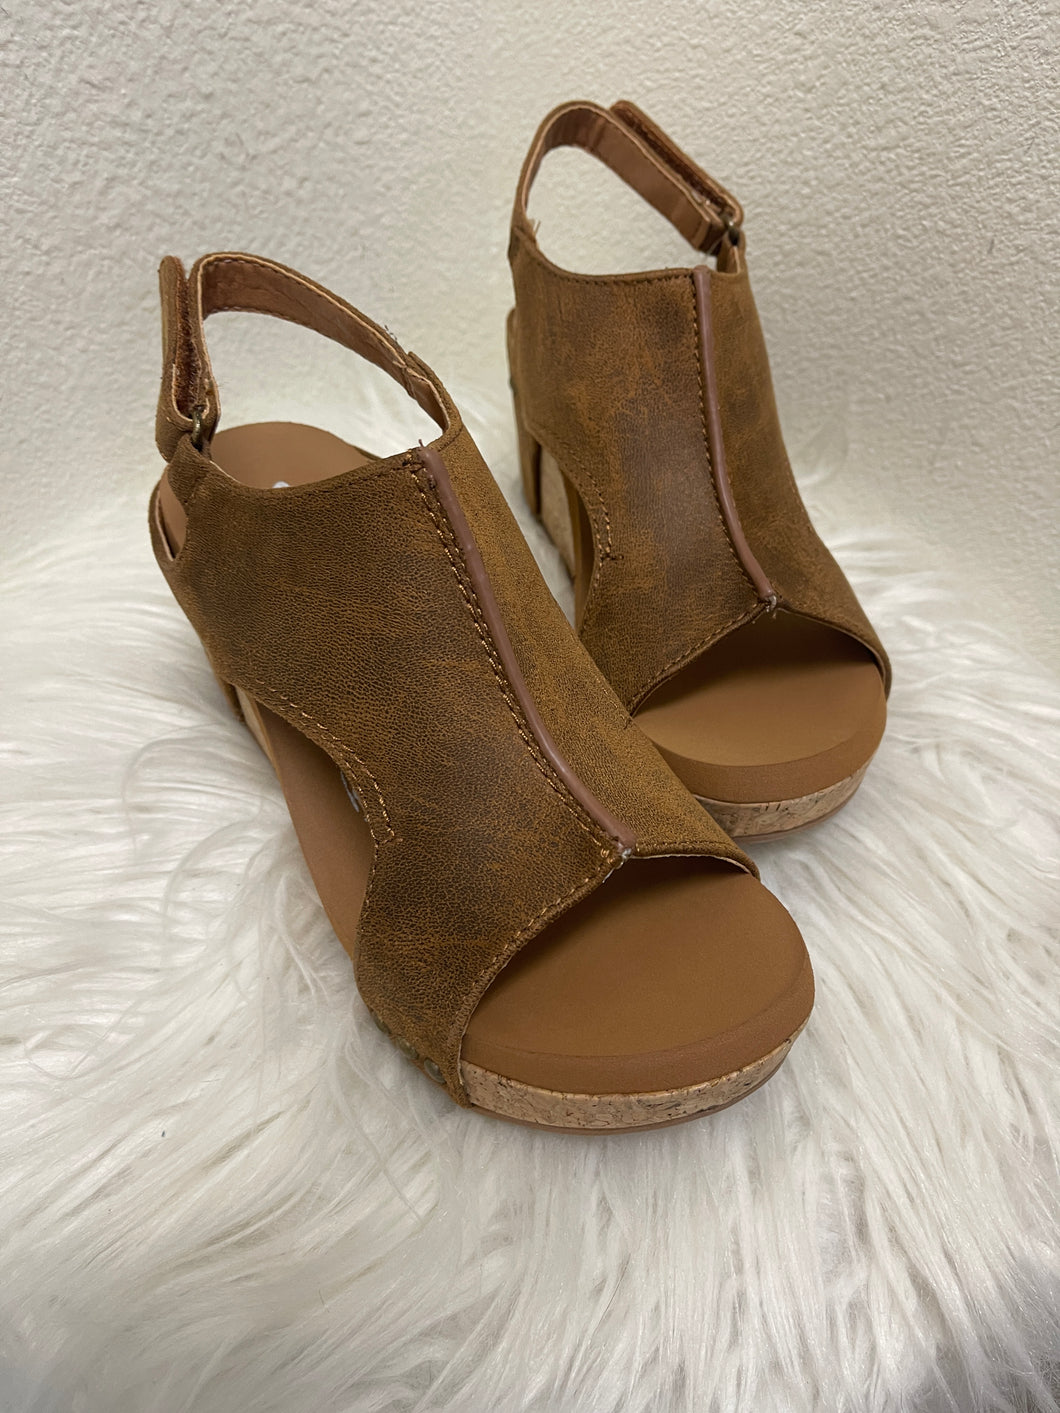 Liberty Tan Leather Sandals